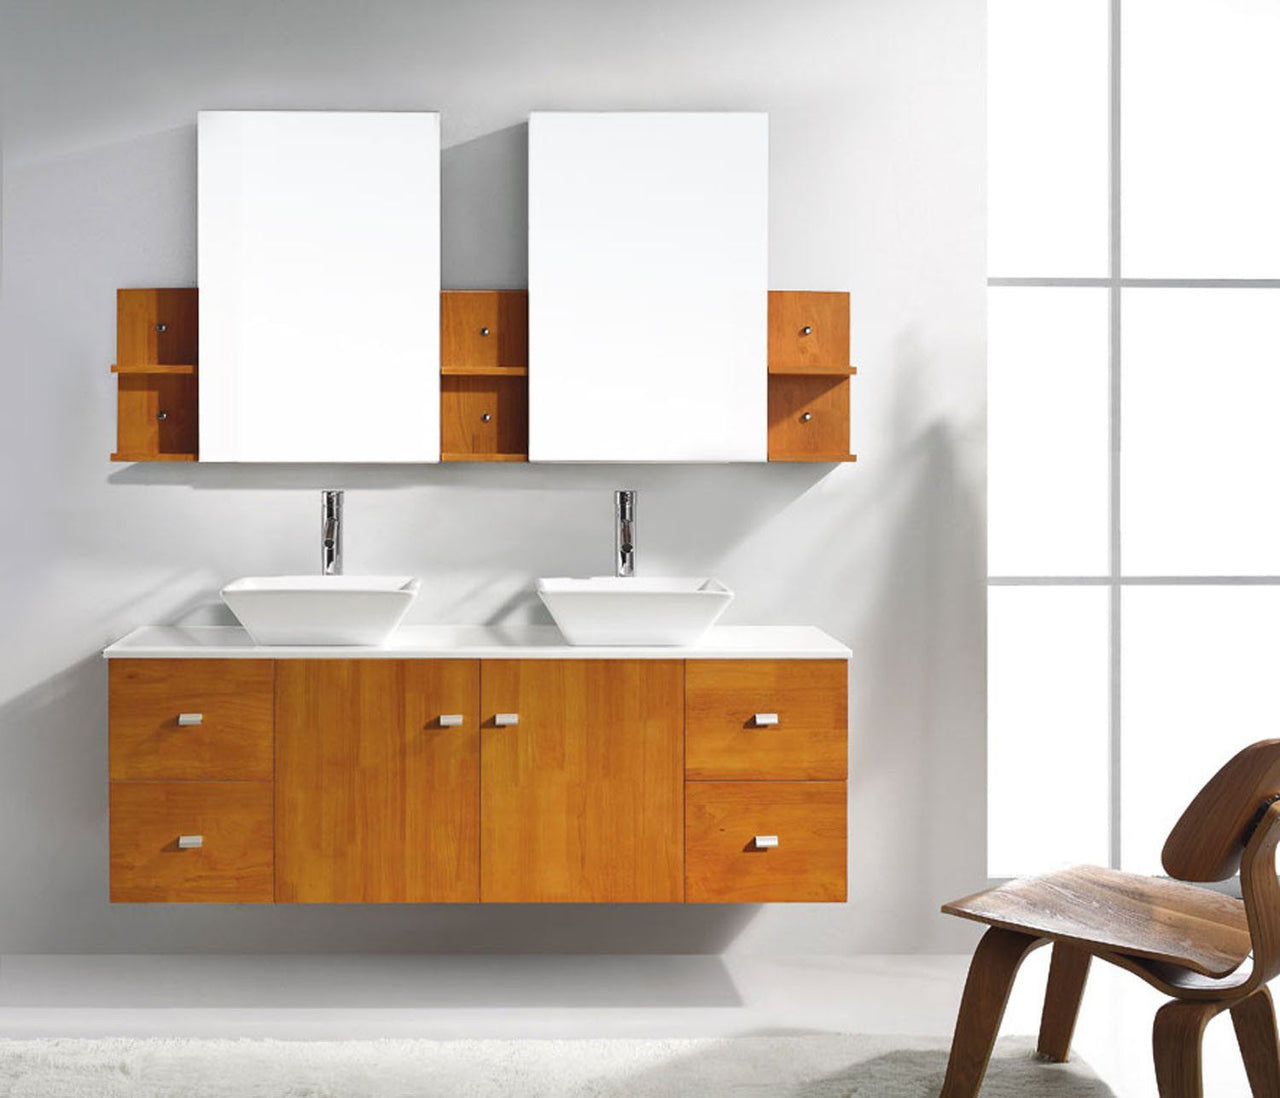 Virtu USA Clarissa 61" Double Square Sink Honey Oak Top Vanity with Polished Chrome Faucet and Mirrors Vanity Virtu USA 